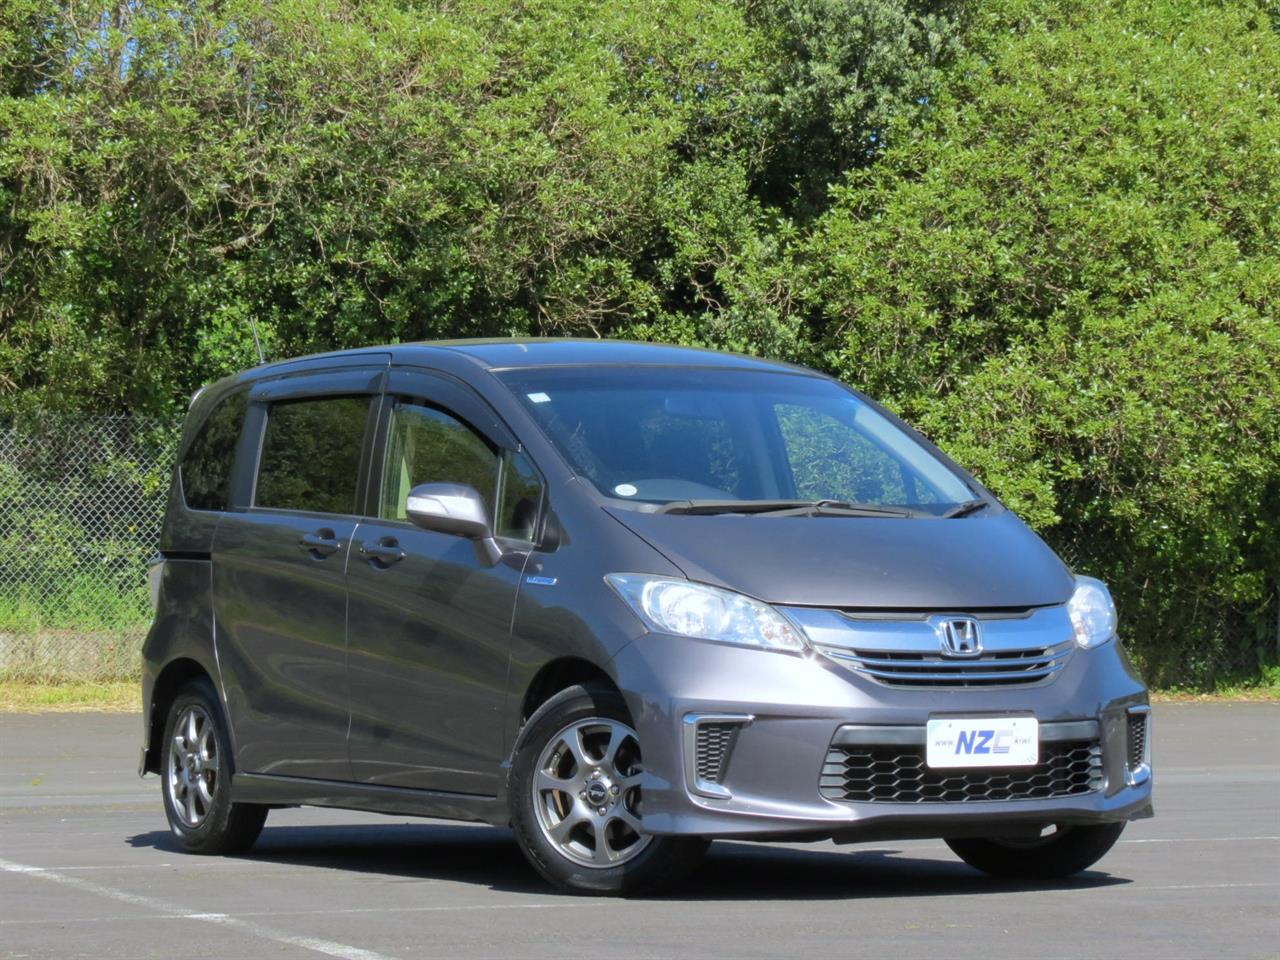 NZC 2014 Honda Freed just arrived to Auckland